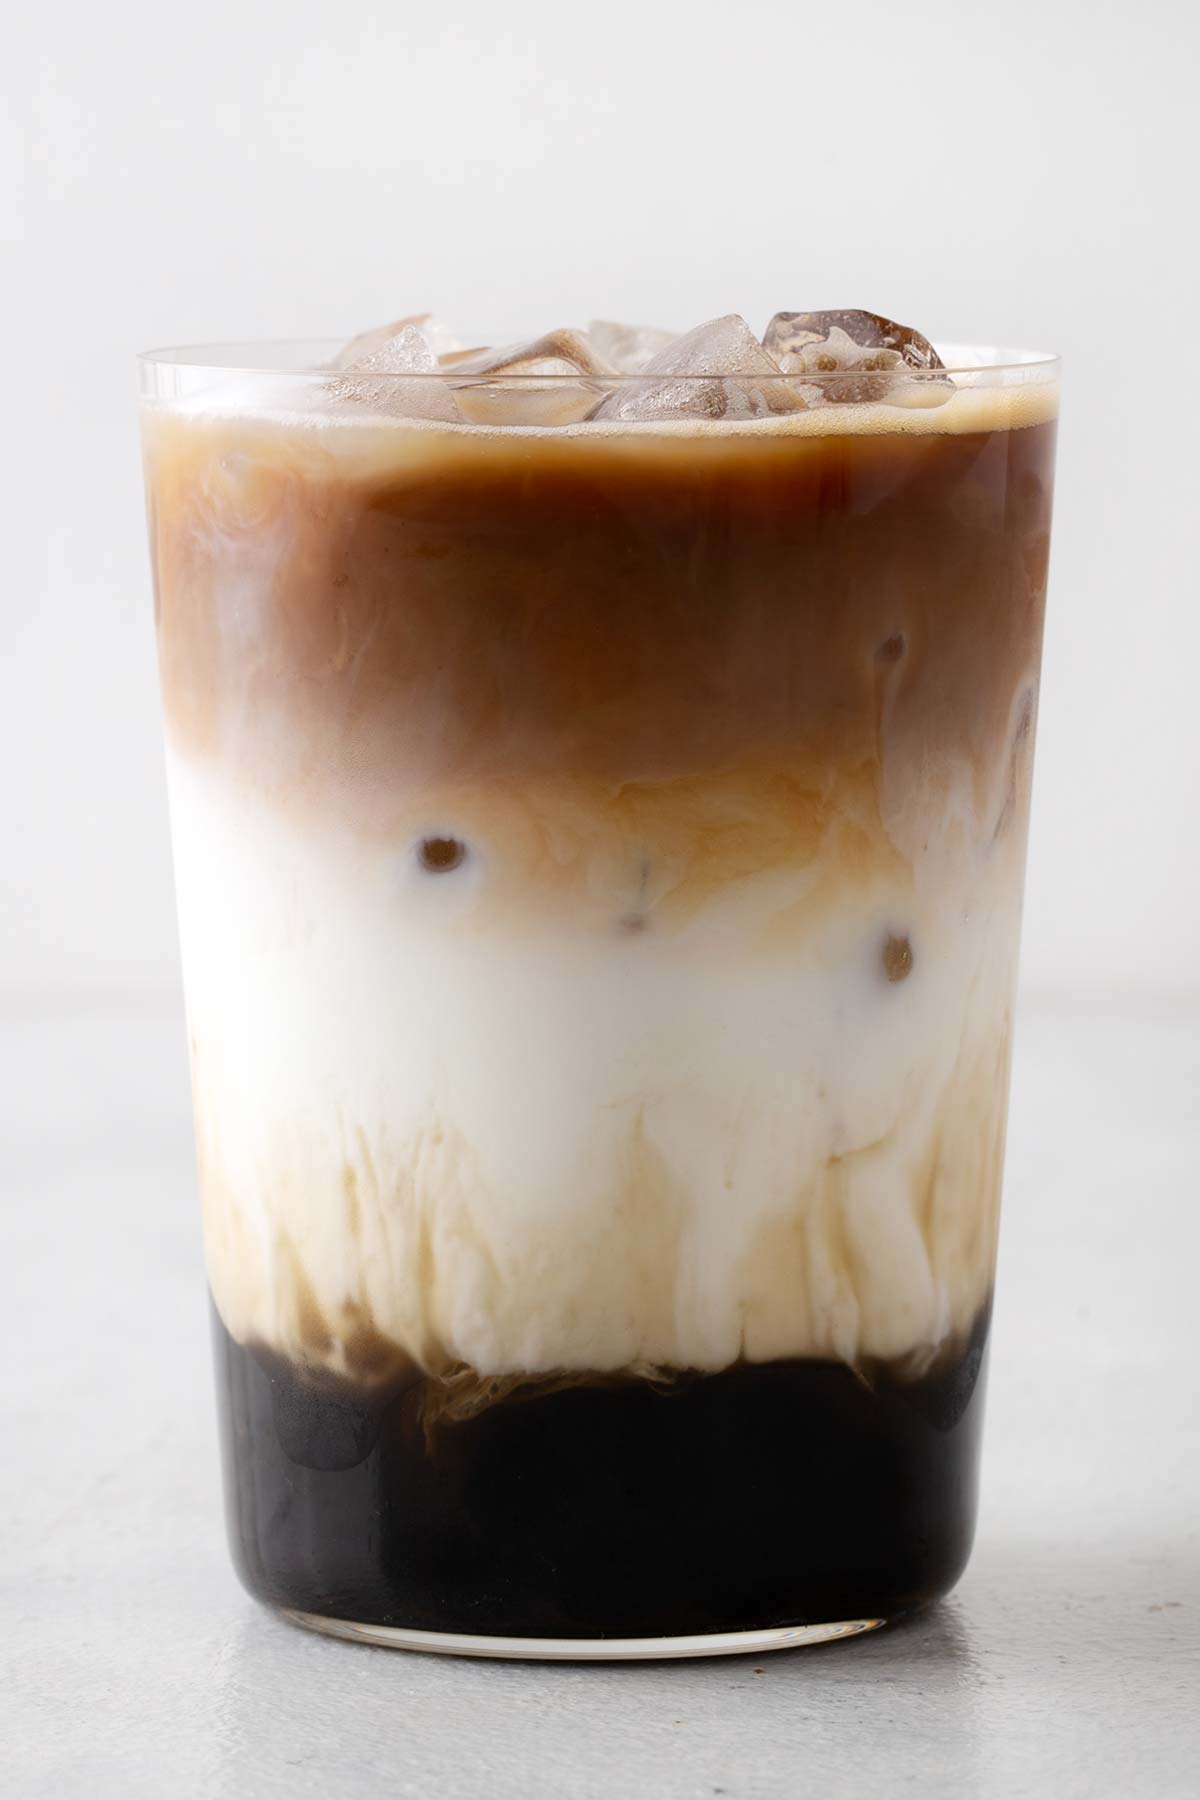 Iced Latte with Boba in a glass to clearly see the drink's layers.